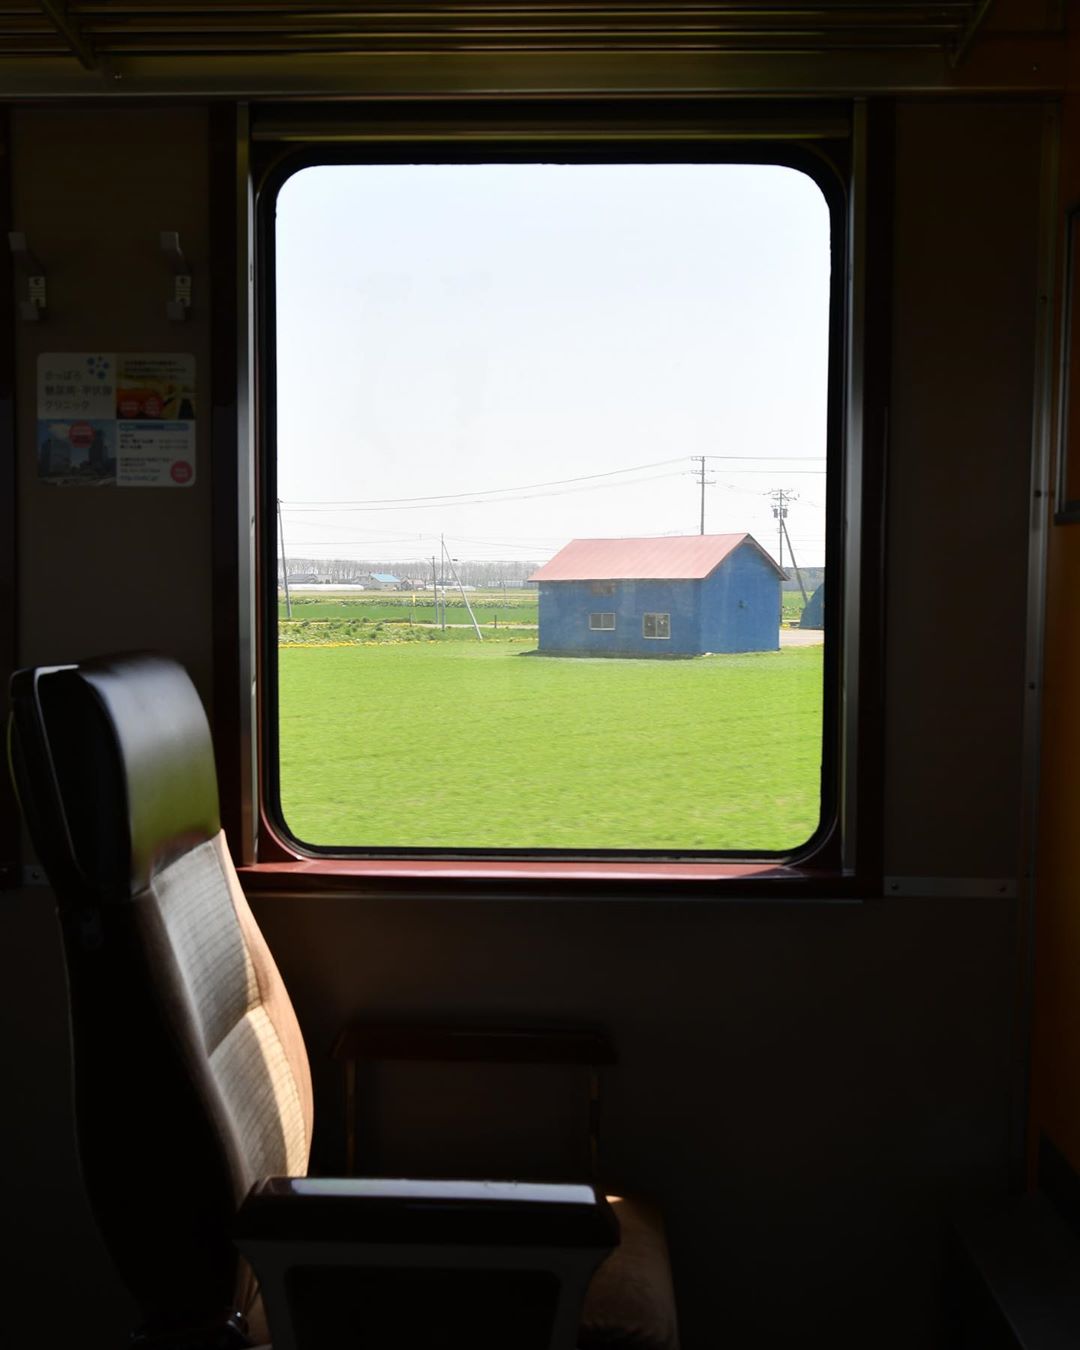 Rural scenery seen from the window of the train